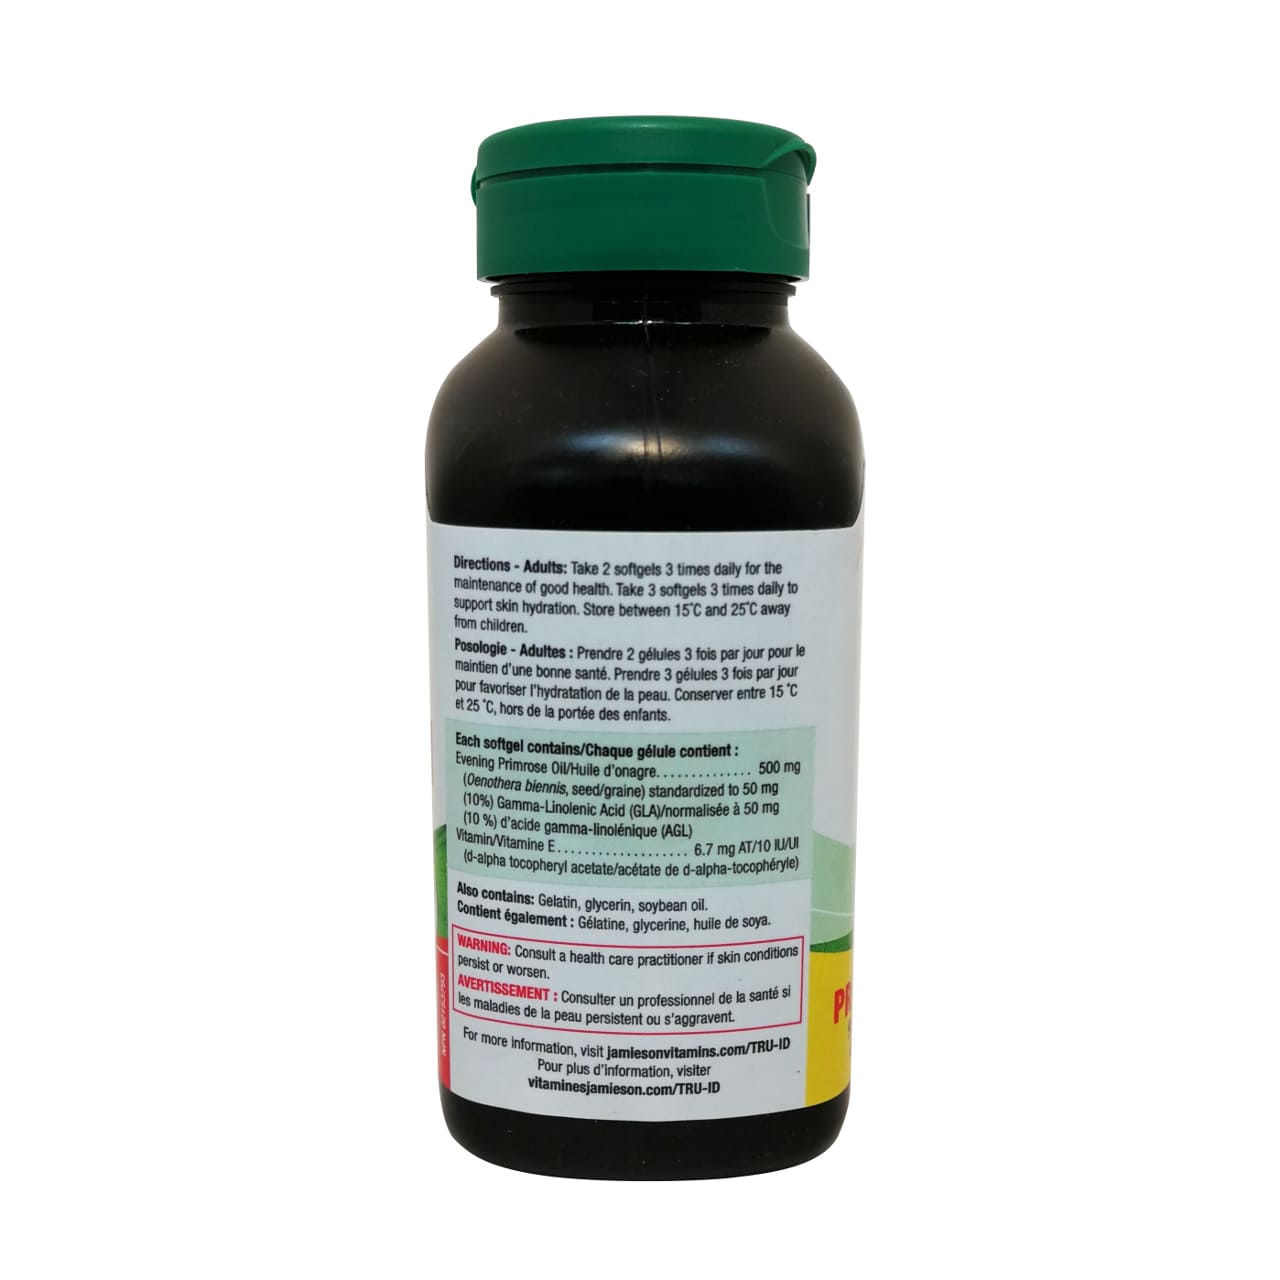 Product directions and ingredients for Jamieson Evening Primrose Oil 500mg in French and English